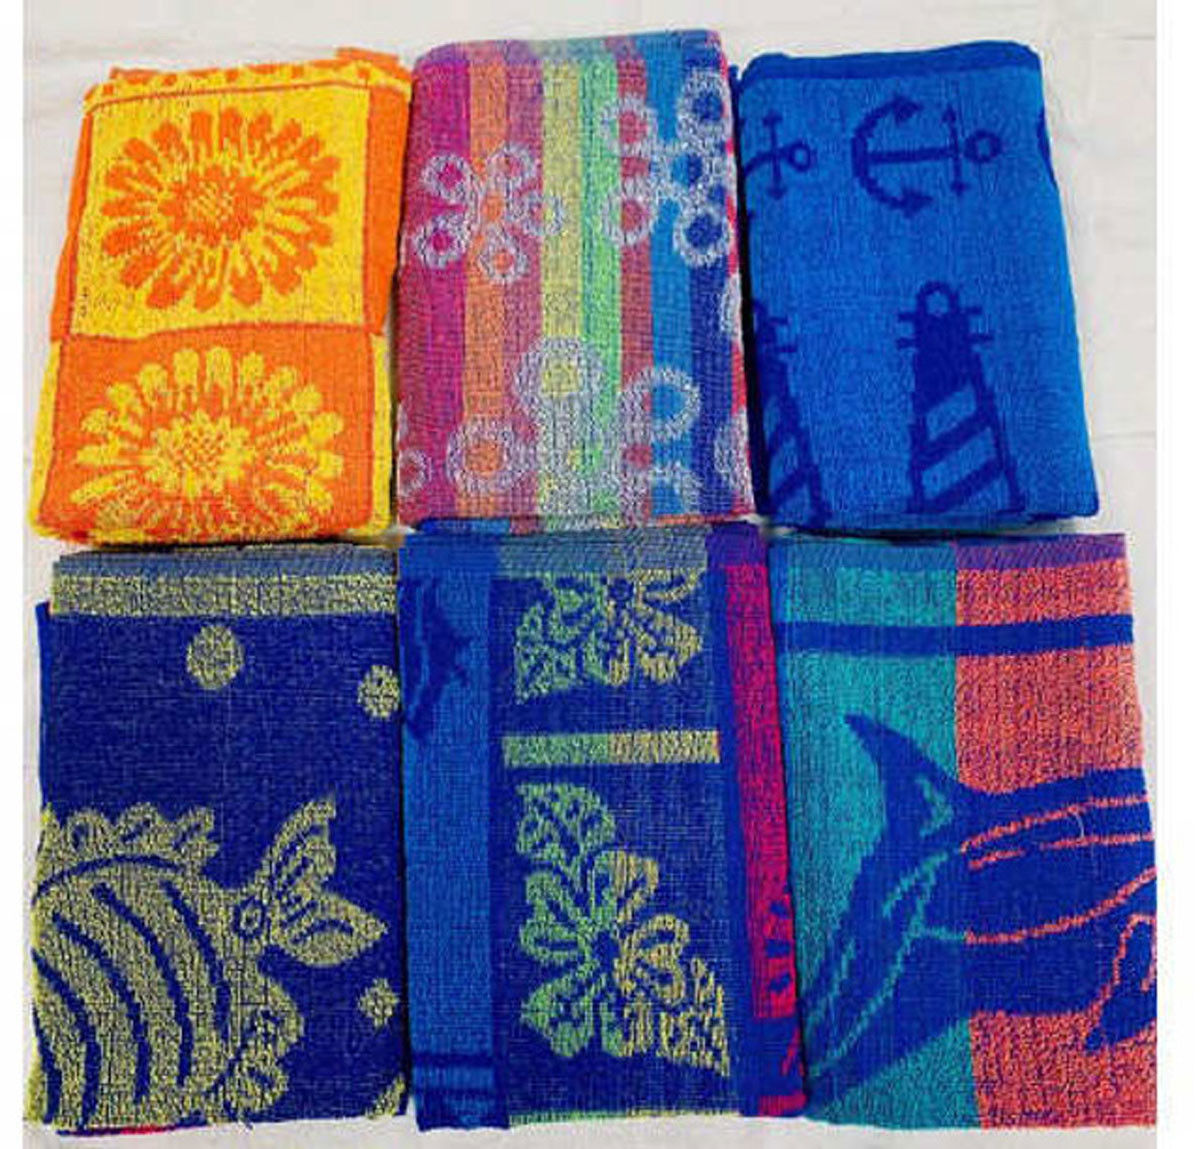 What is the material composition of these economy pool towels from the 6 pack design assortment?